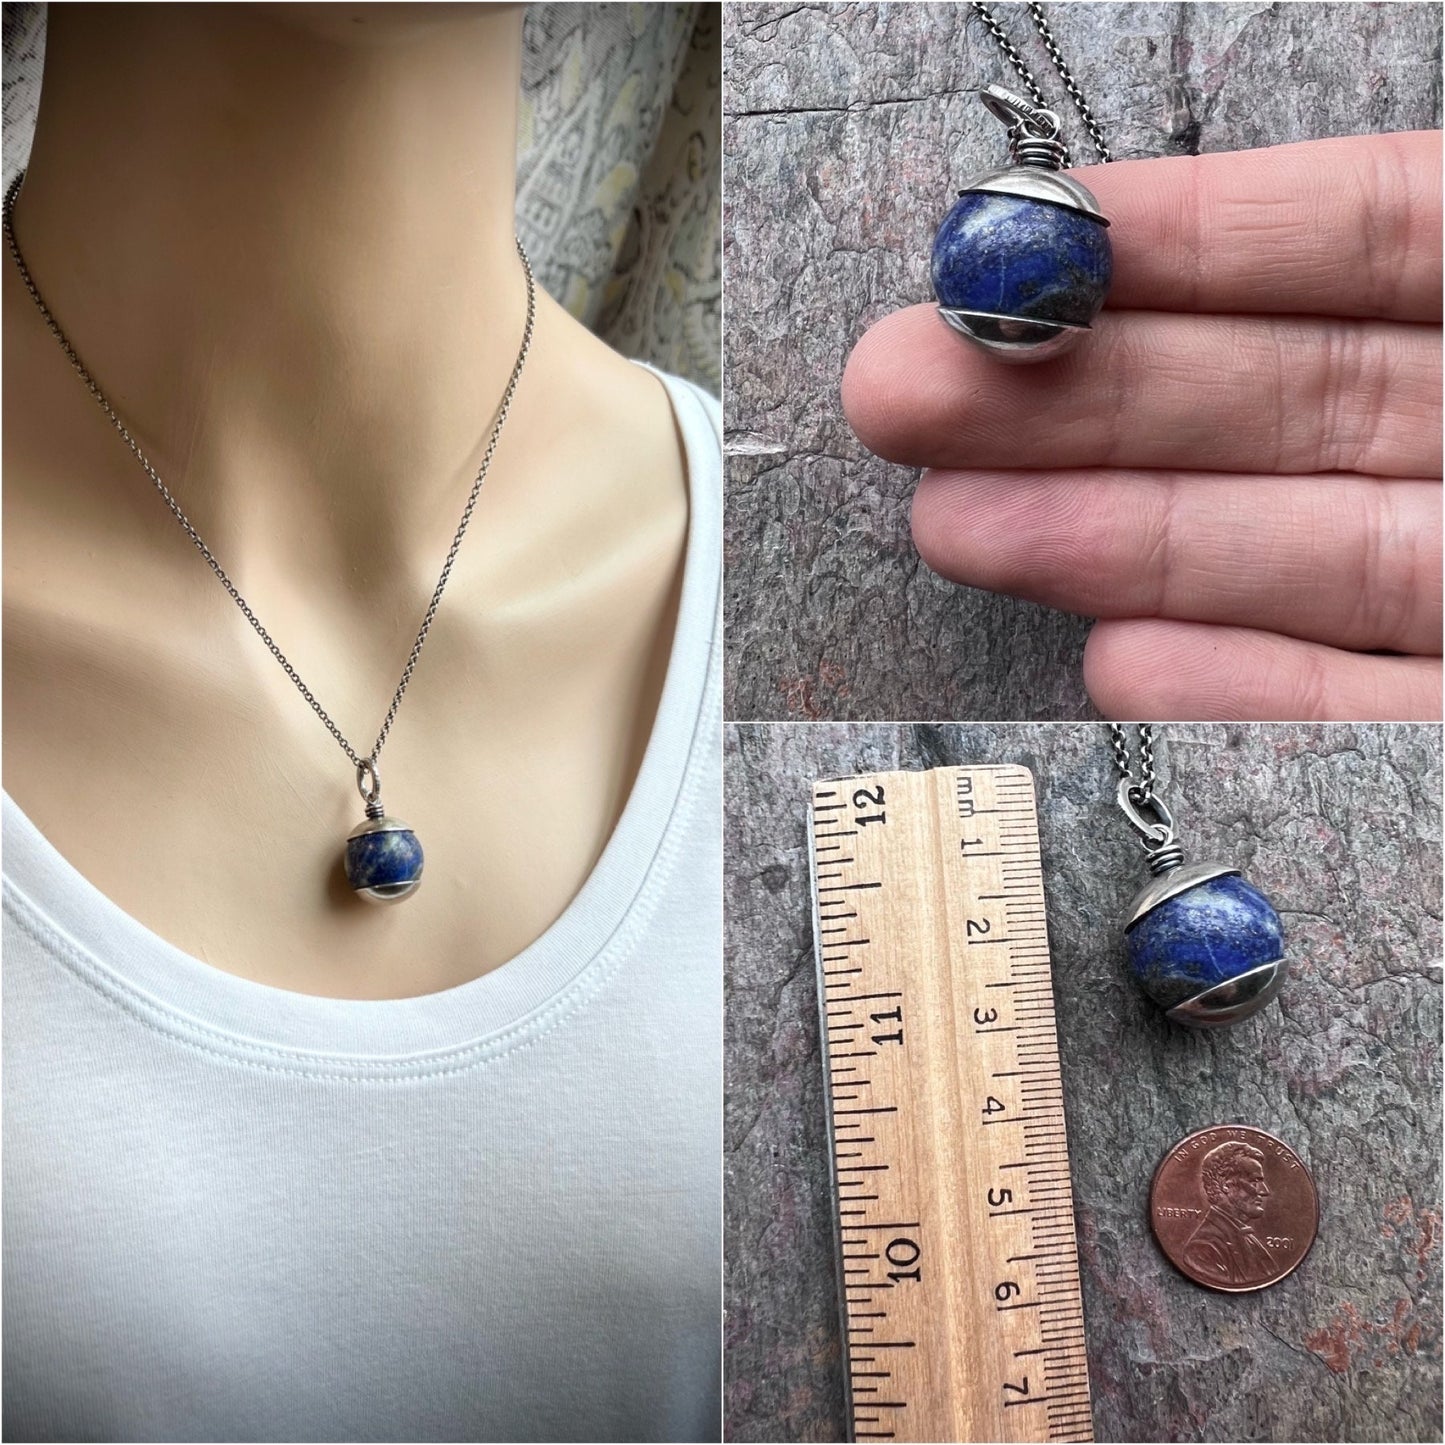 Lapis Lazuli Sterling Silver Necklace - Handmade Pendant on Sterling Silver Chain